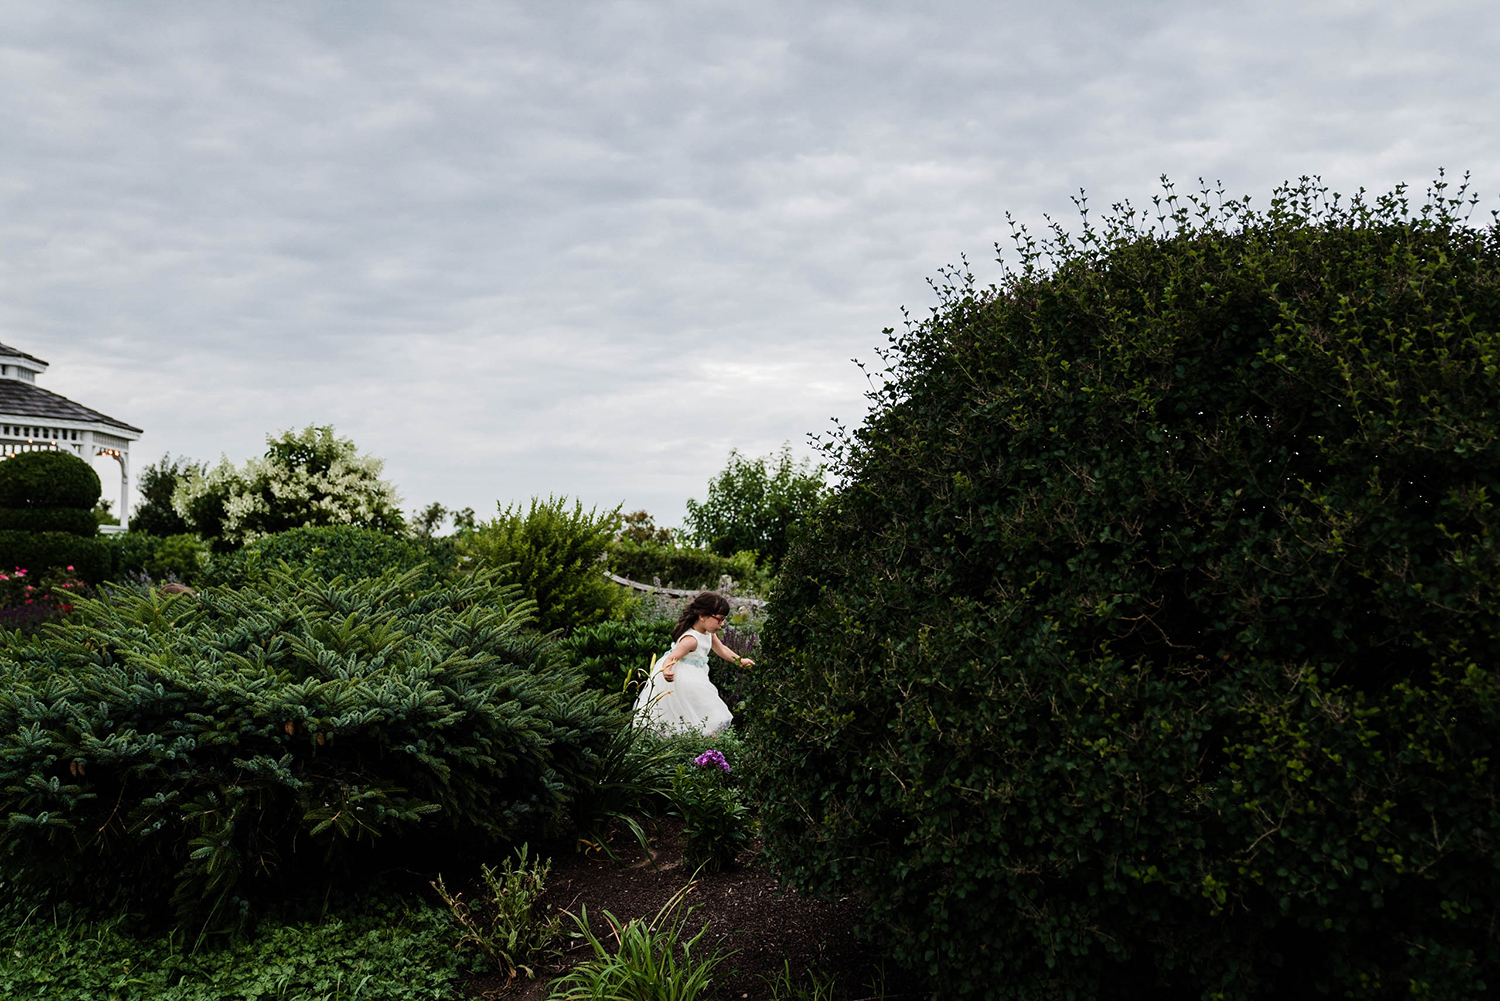 A documentary photograph of a flower girl running through the garden during an outdoor wedding outside of Boston